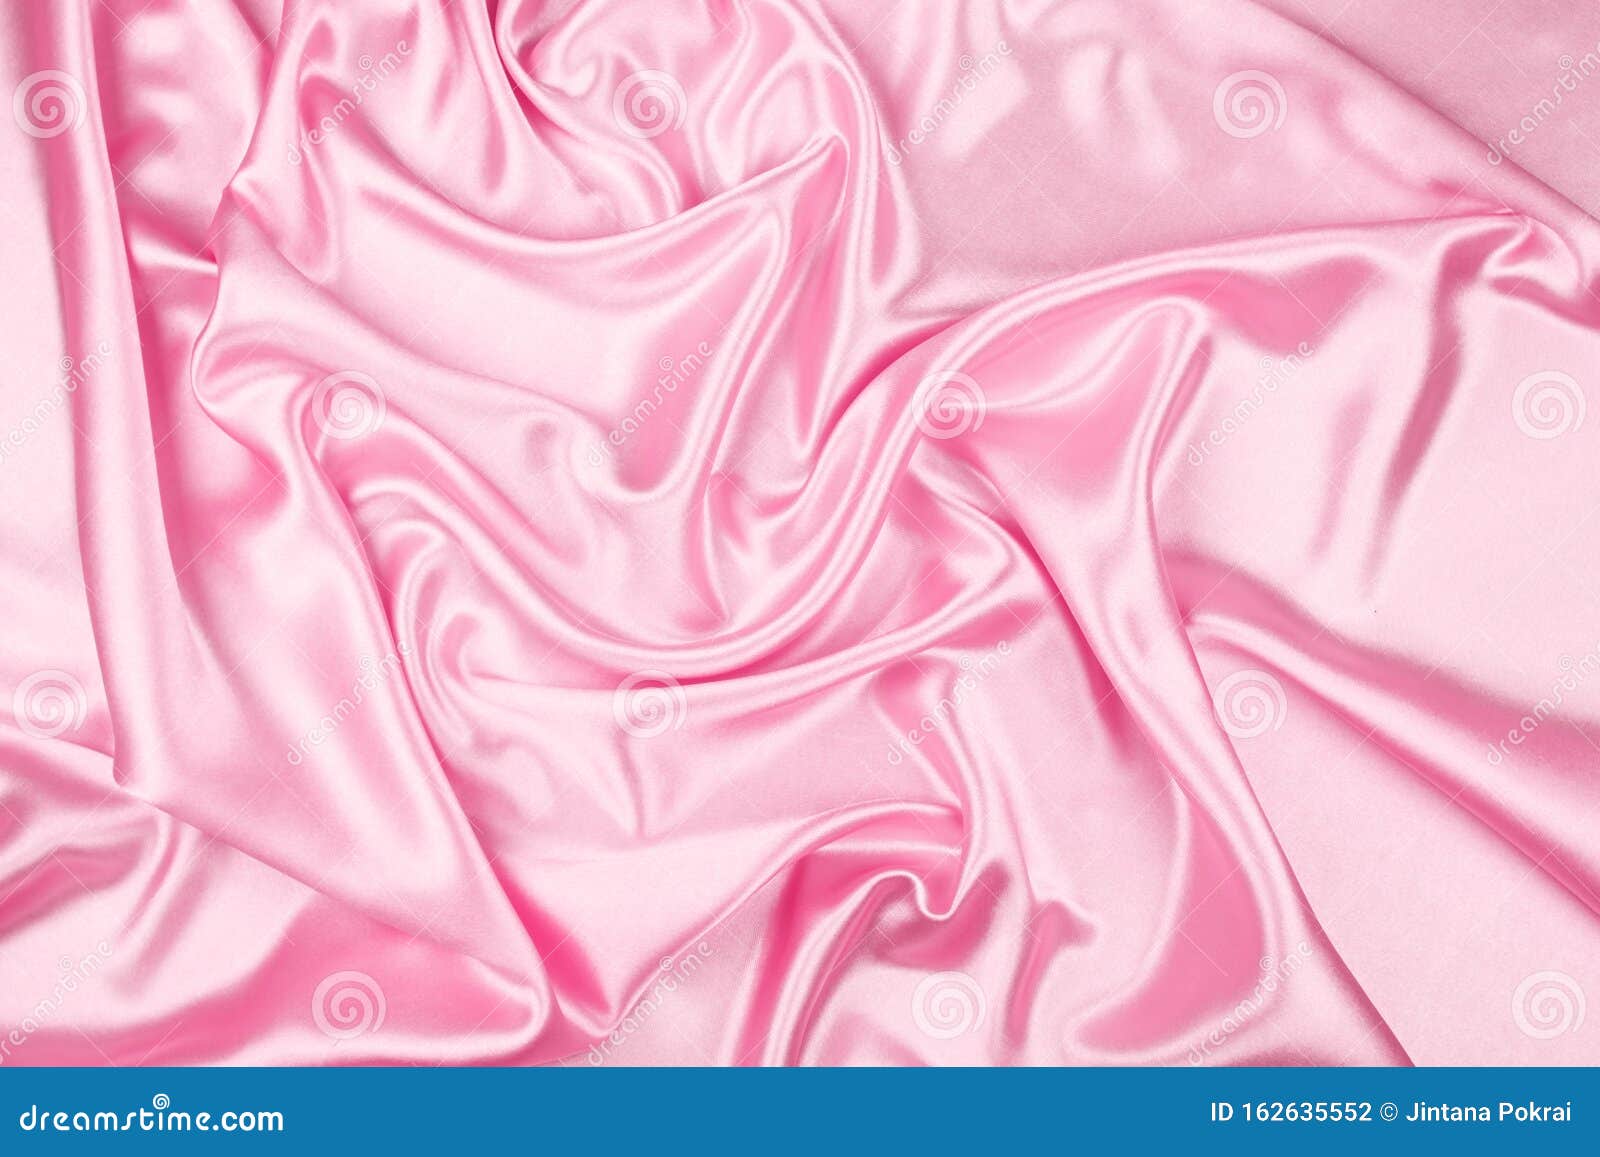 Pink Luxury Satin Fabric Texture For Background Stock Photo - Image Of  Bridal, Sheet: 162635552